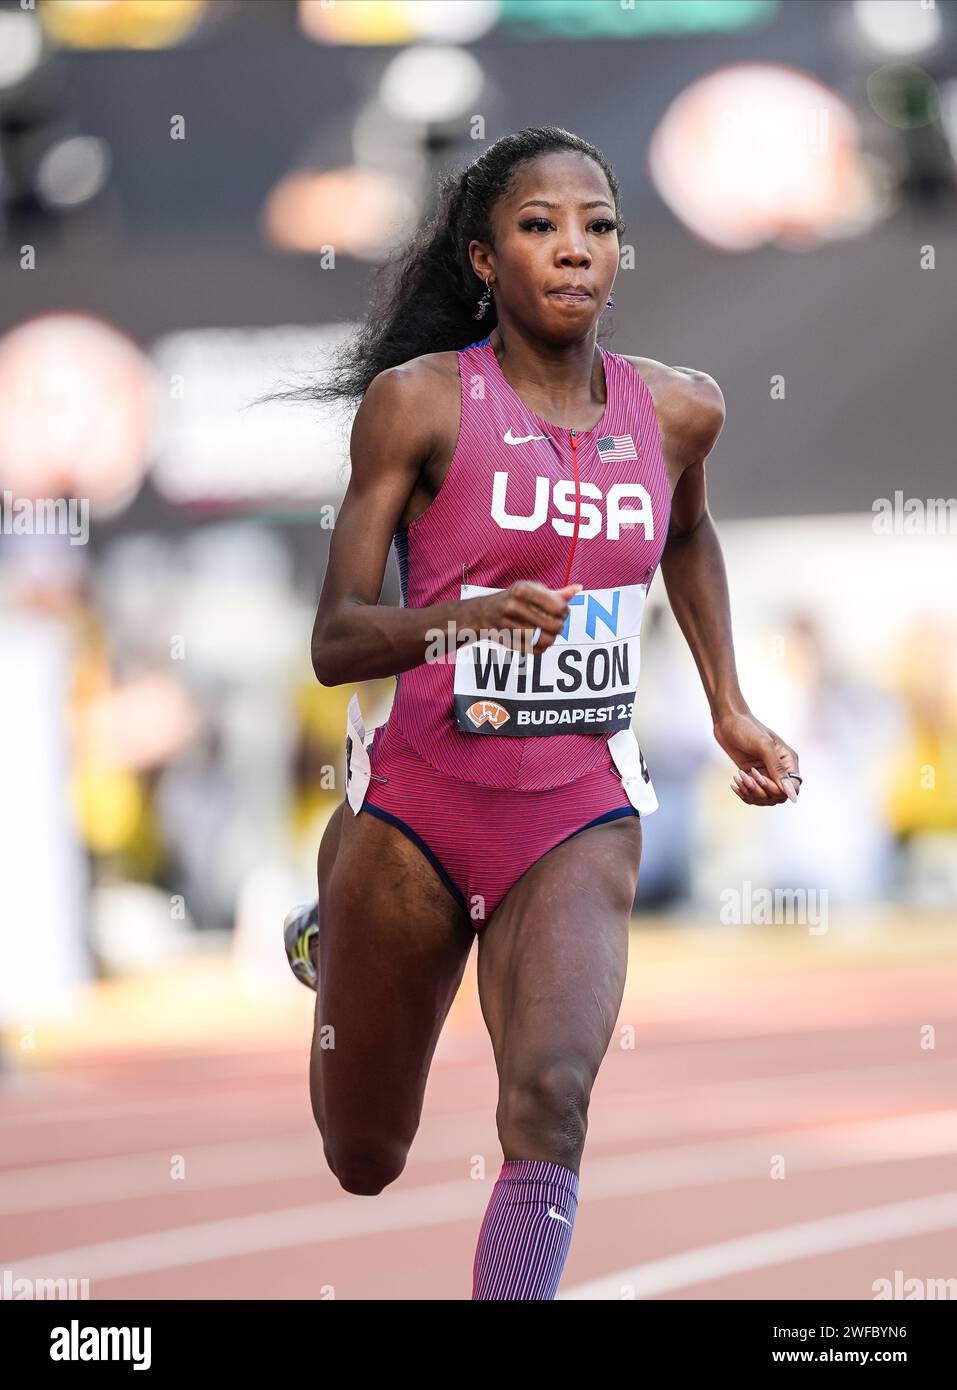 Britton WILSON participating in the 400 meters at the World Athletics Championships in Budapest 2023. Stock Photo